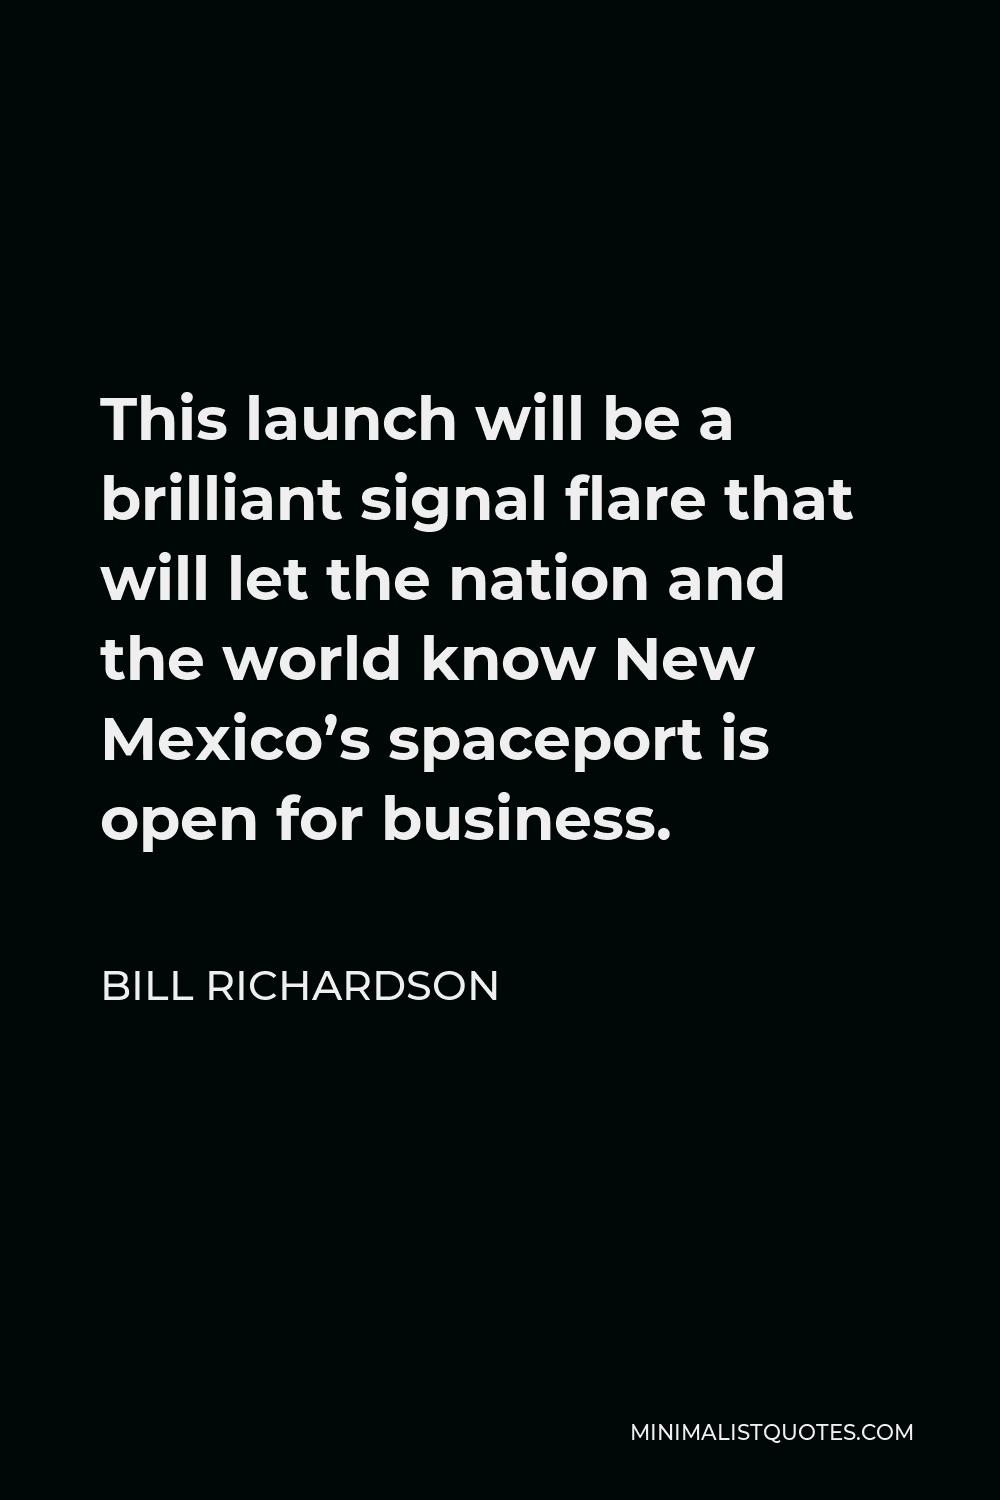 Bill Richardson Quote - This launch will be a brilliant signal flare that will let the nation and the world know New Mexico’s spaceport is open for business.